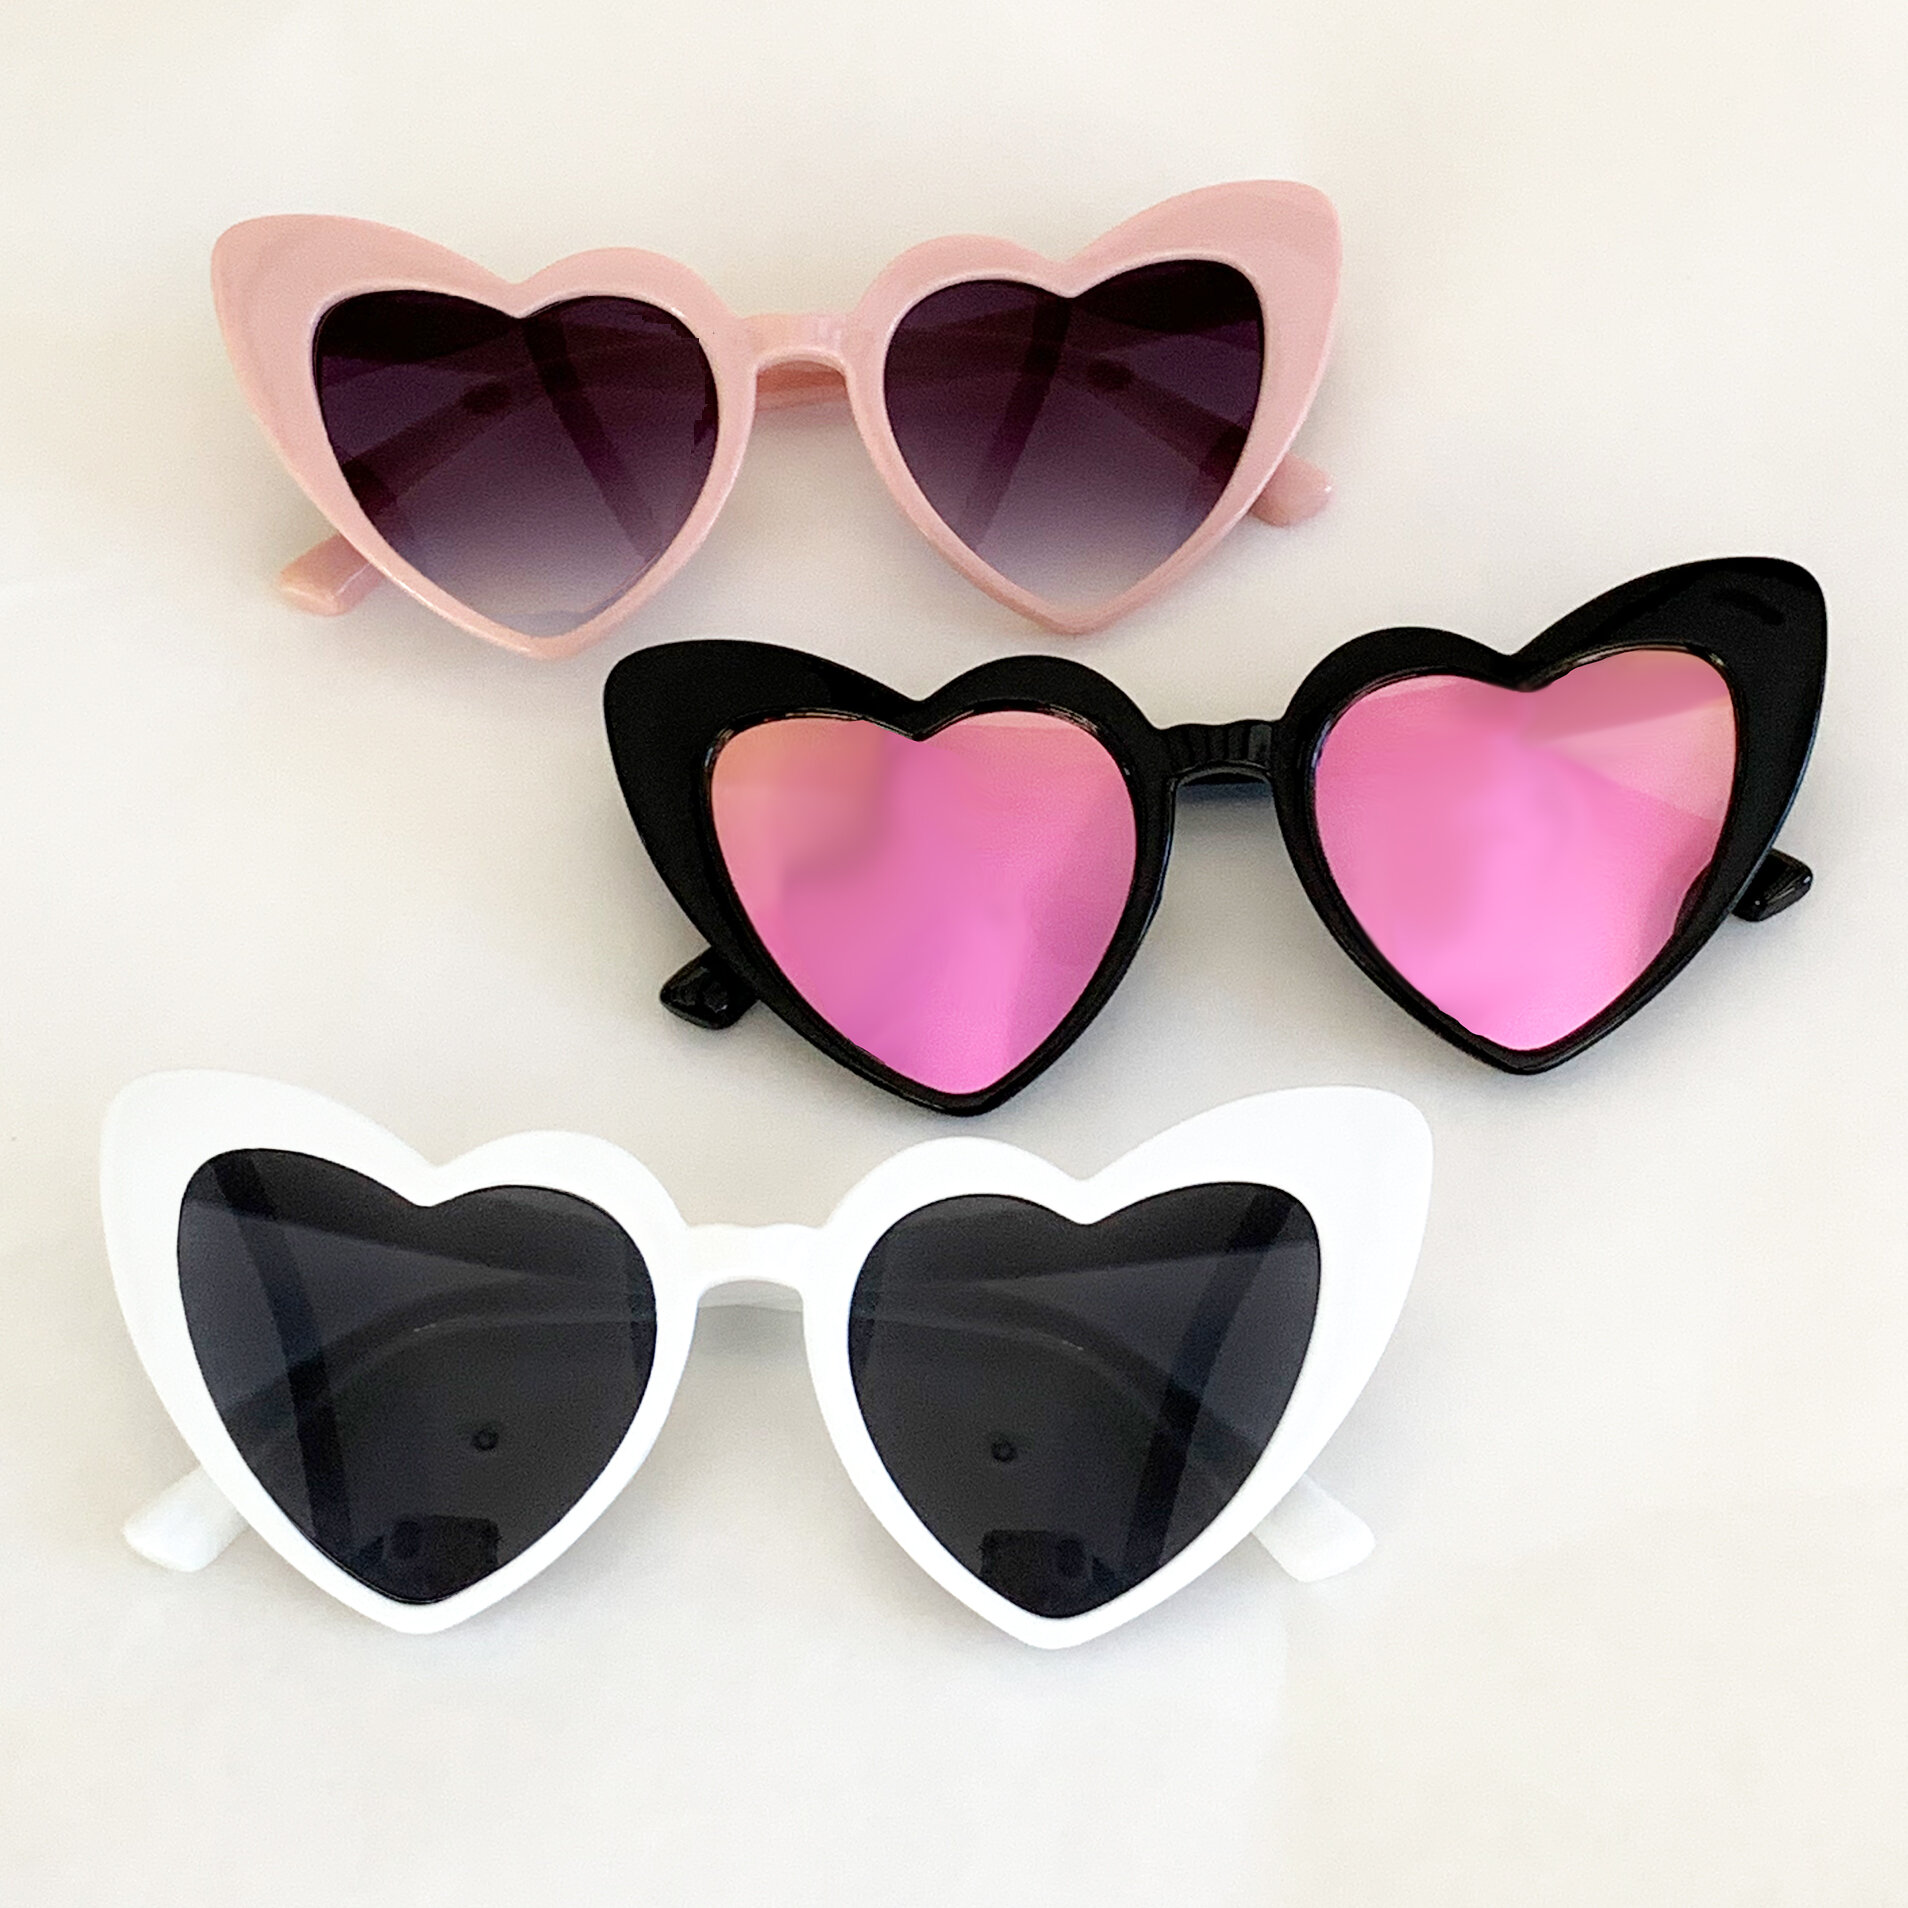 SMARTOWN Heart Shaped Sunglasses for Women and Kids Girls, Mother and  daughter M | eBay